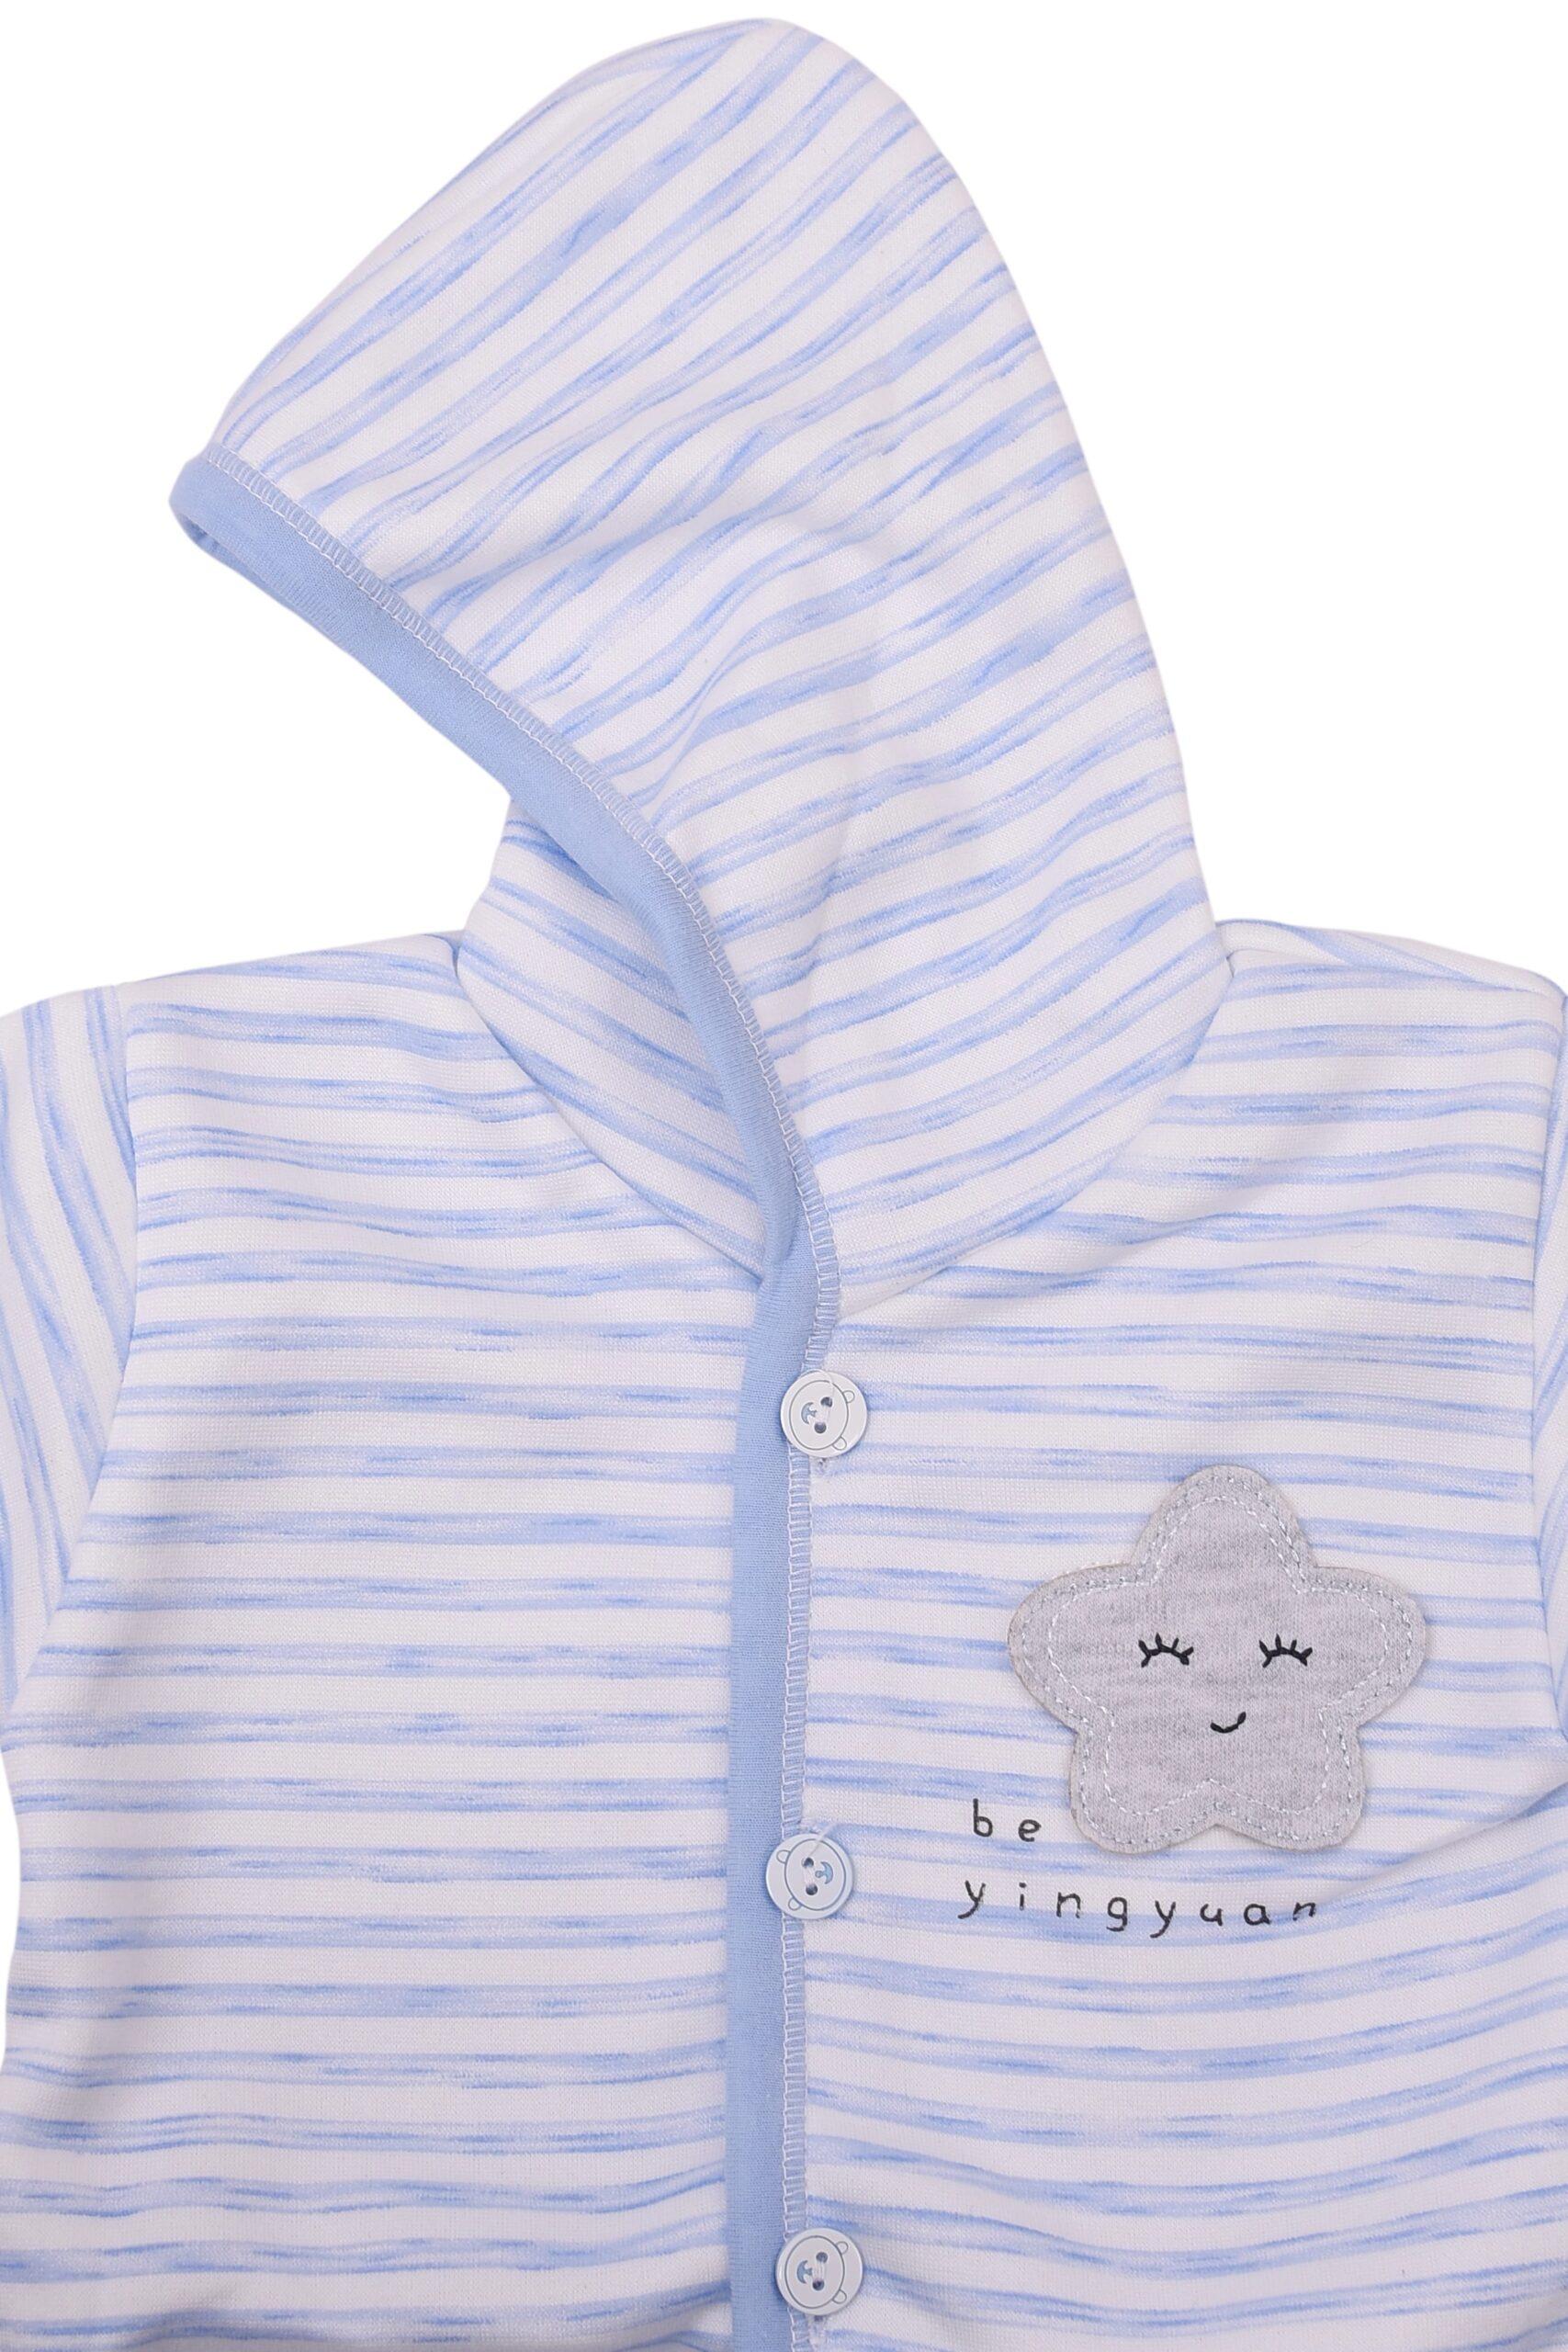 Baby's Warm Unisex Cotton Suit Set - 1Pajama and 1Hooded Shirt- Blue Strip